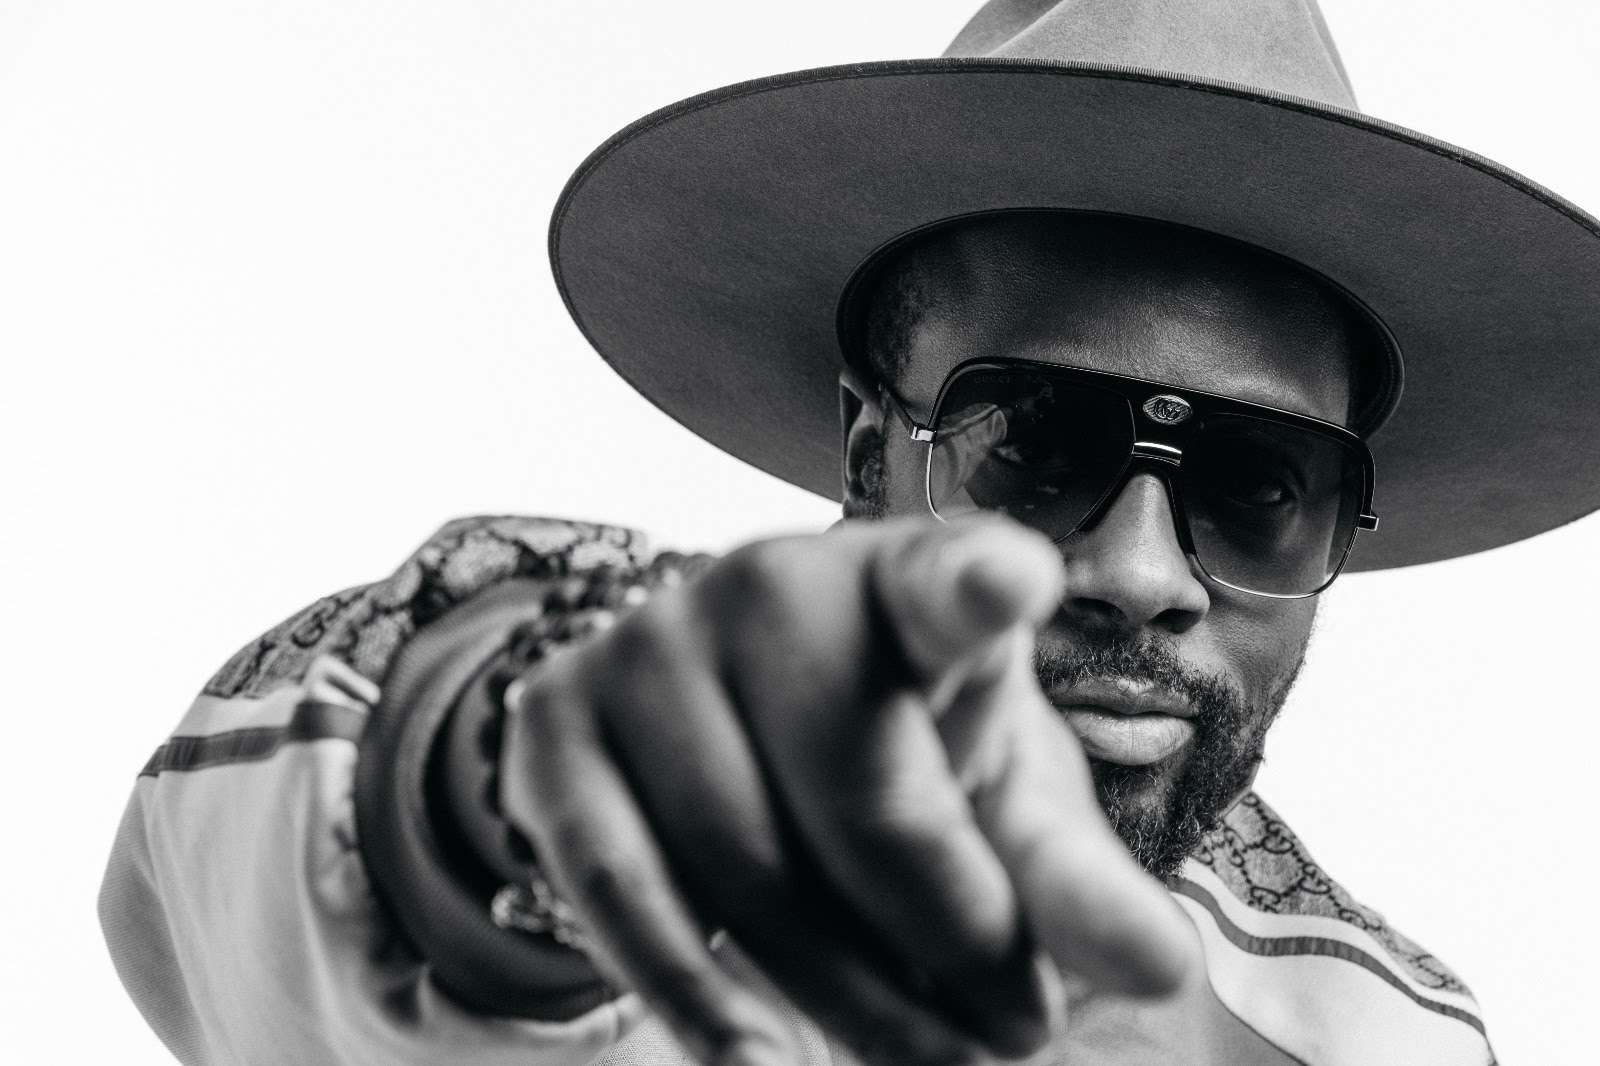 Wyclef Jean wearing a wide-brim hat and sunglasses and pointing into the camera.